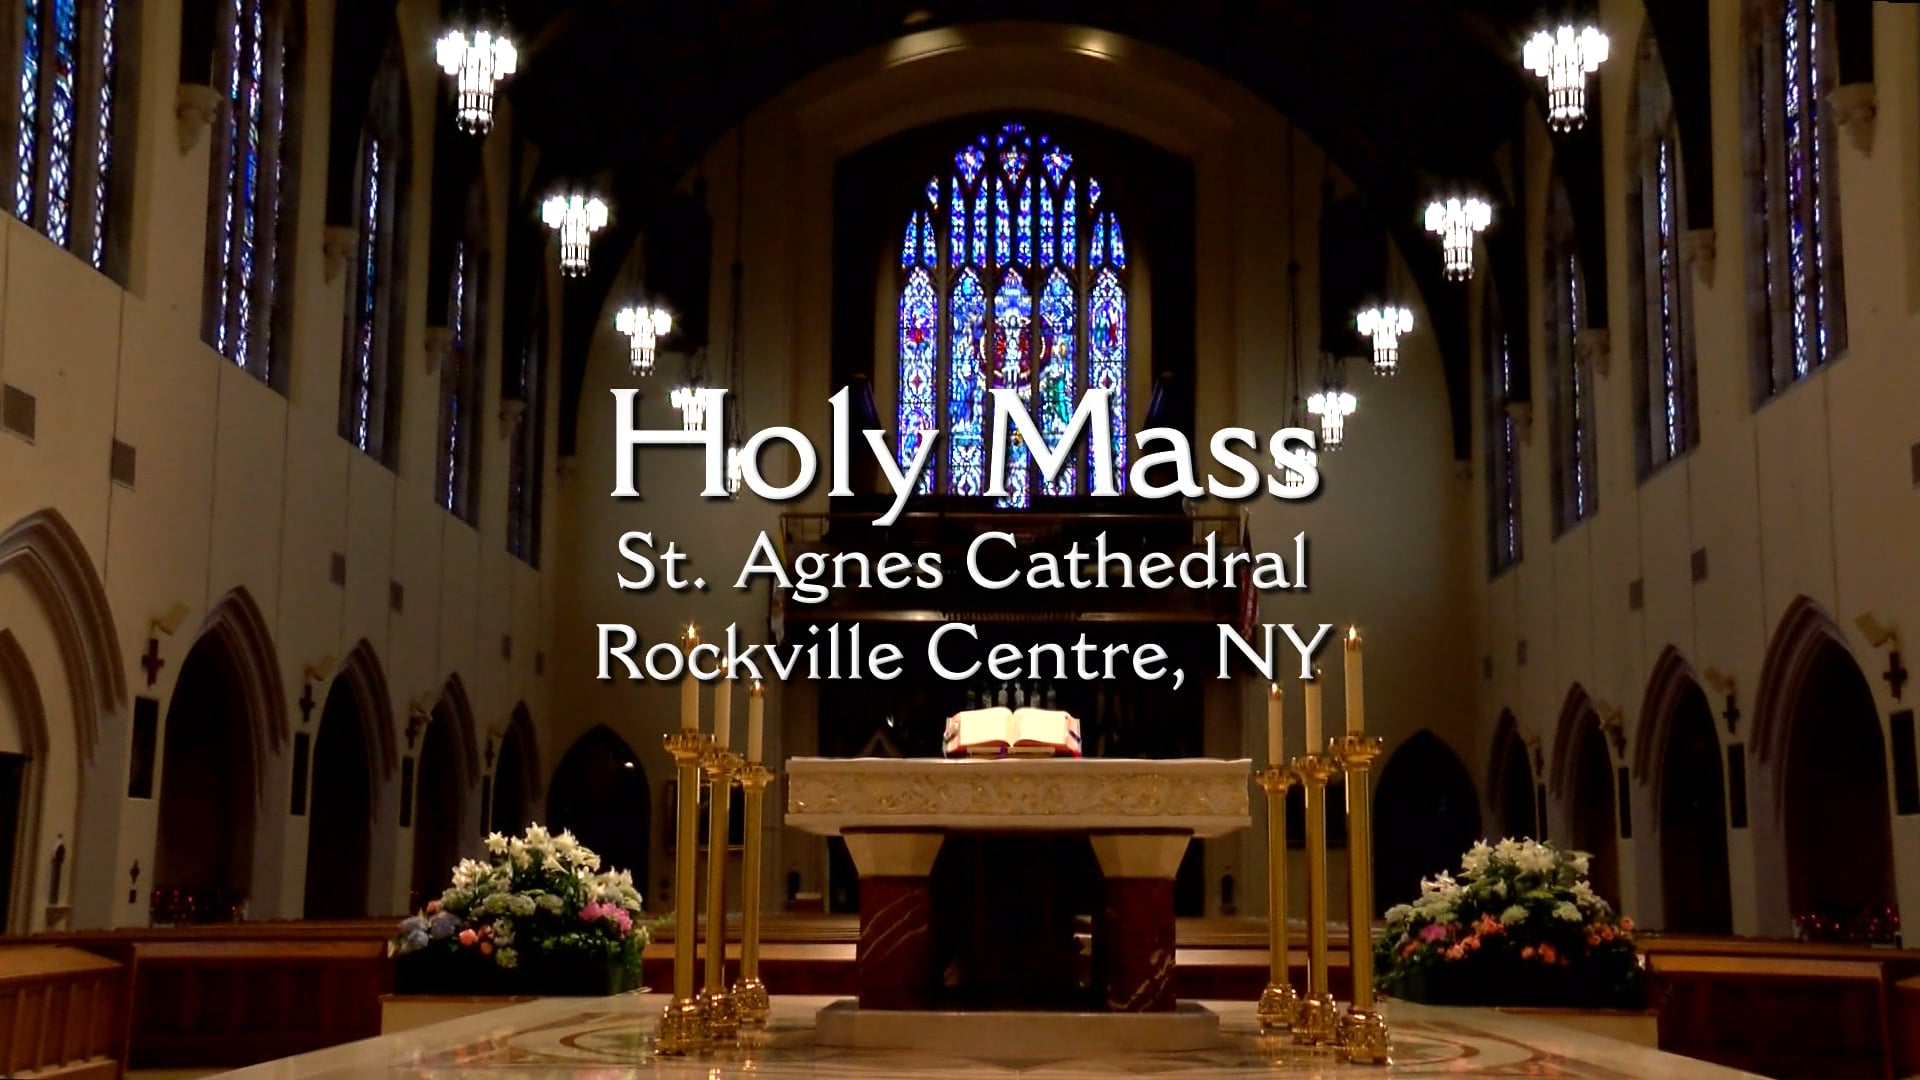 Mass from St. Agnes Cathedral - May 26, 2022